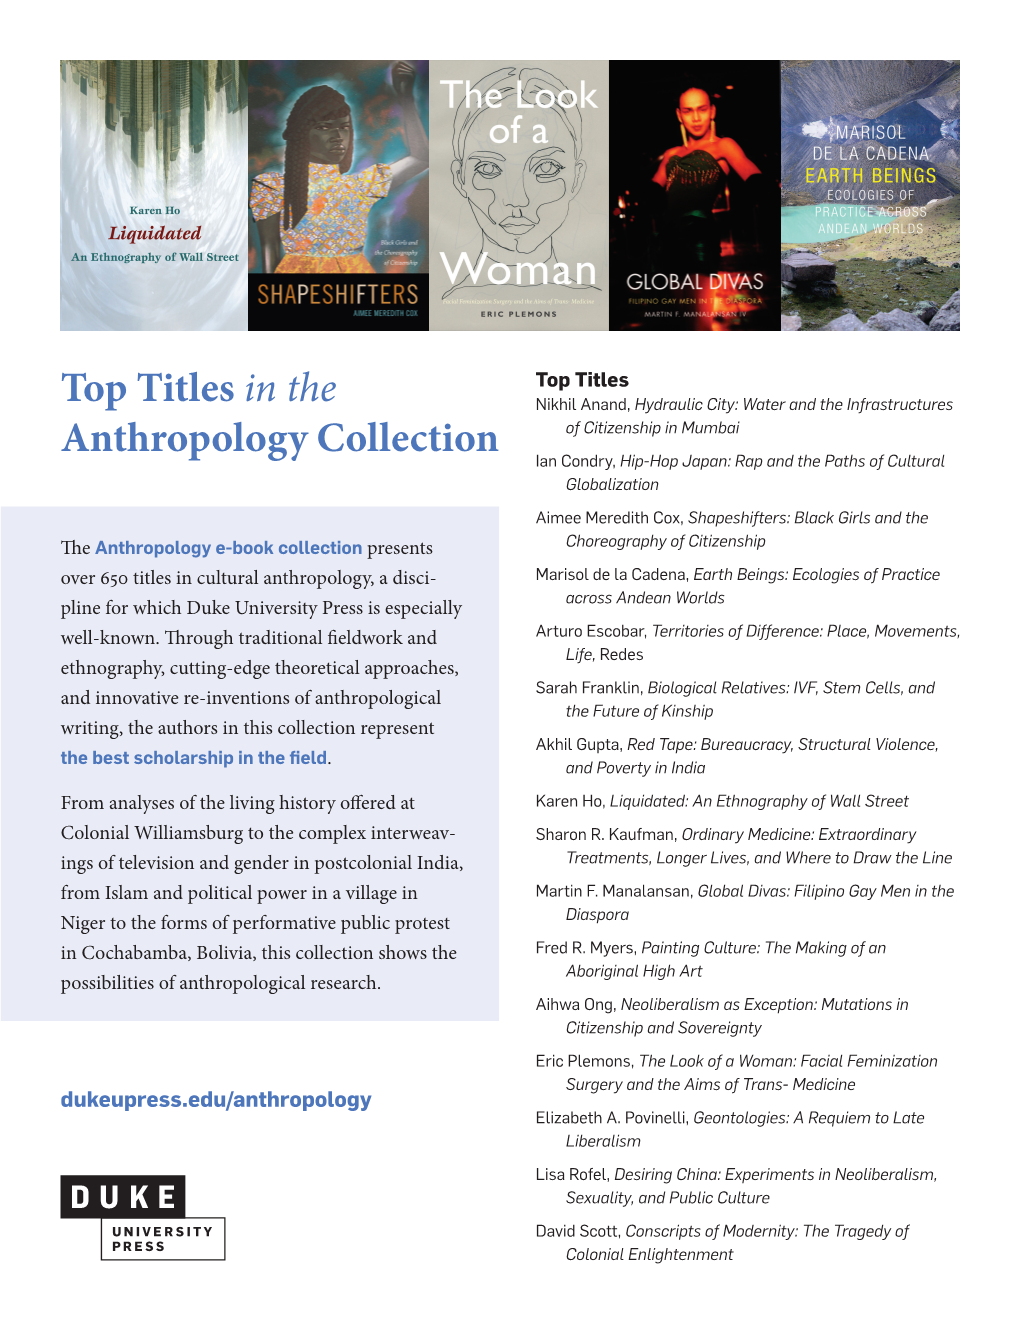 Top Titles in the Anthropology Collection